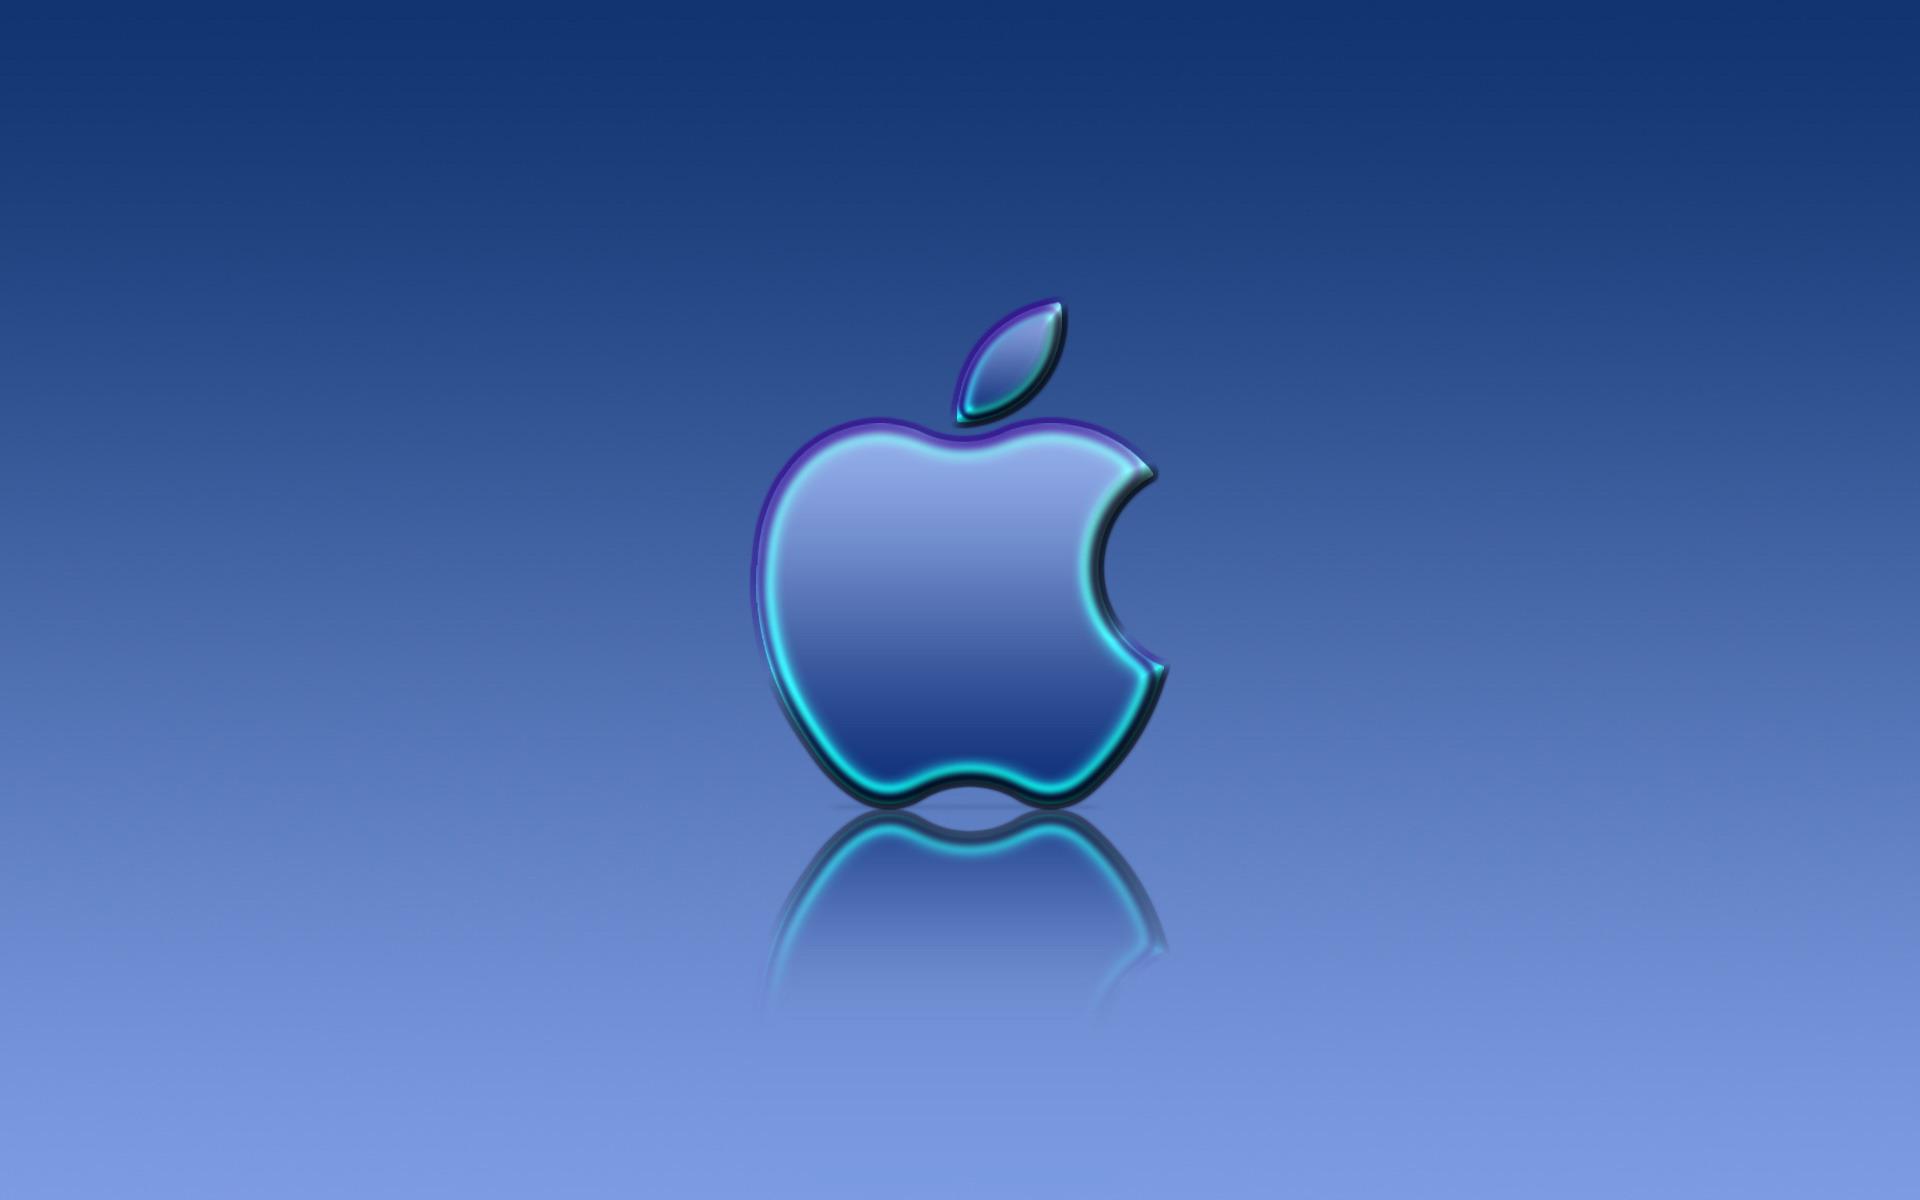 Blue Apple Wallpaper Hd Images amp Pictures   Becuo